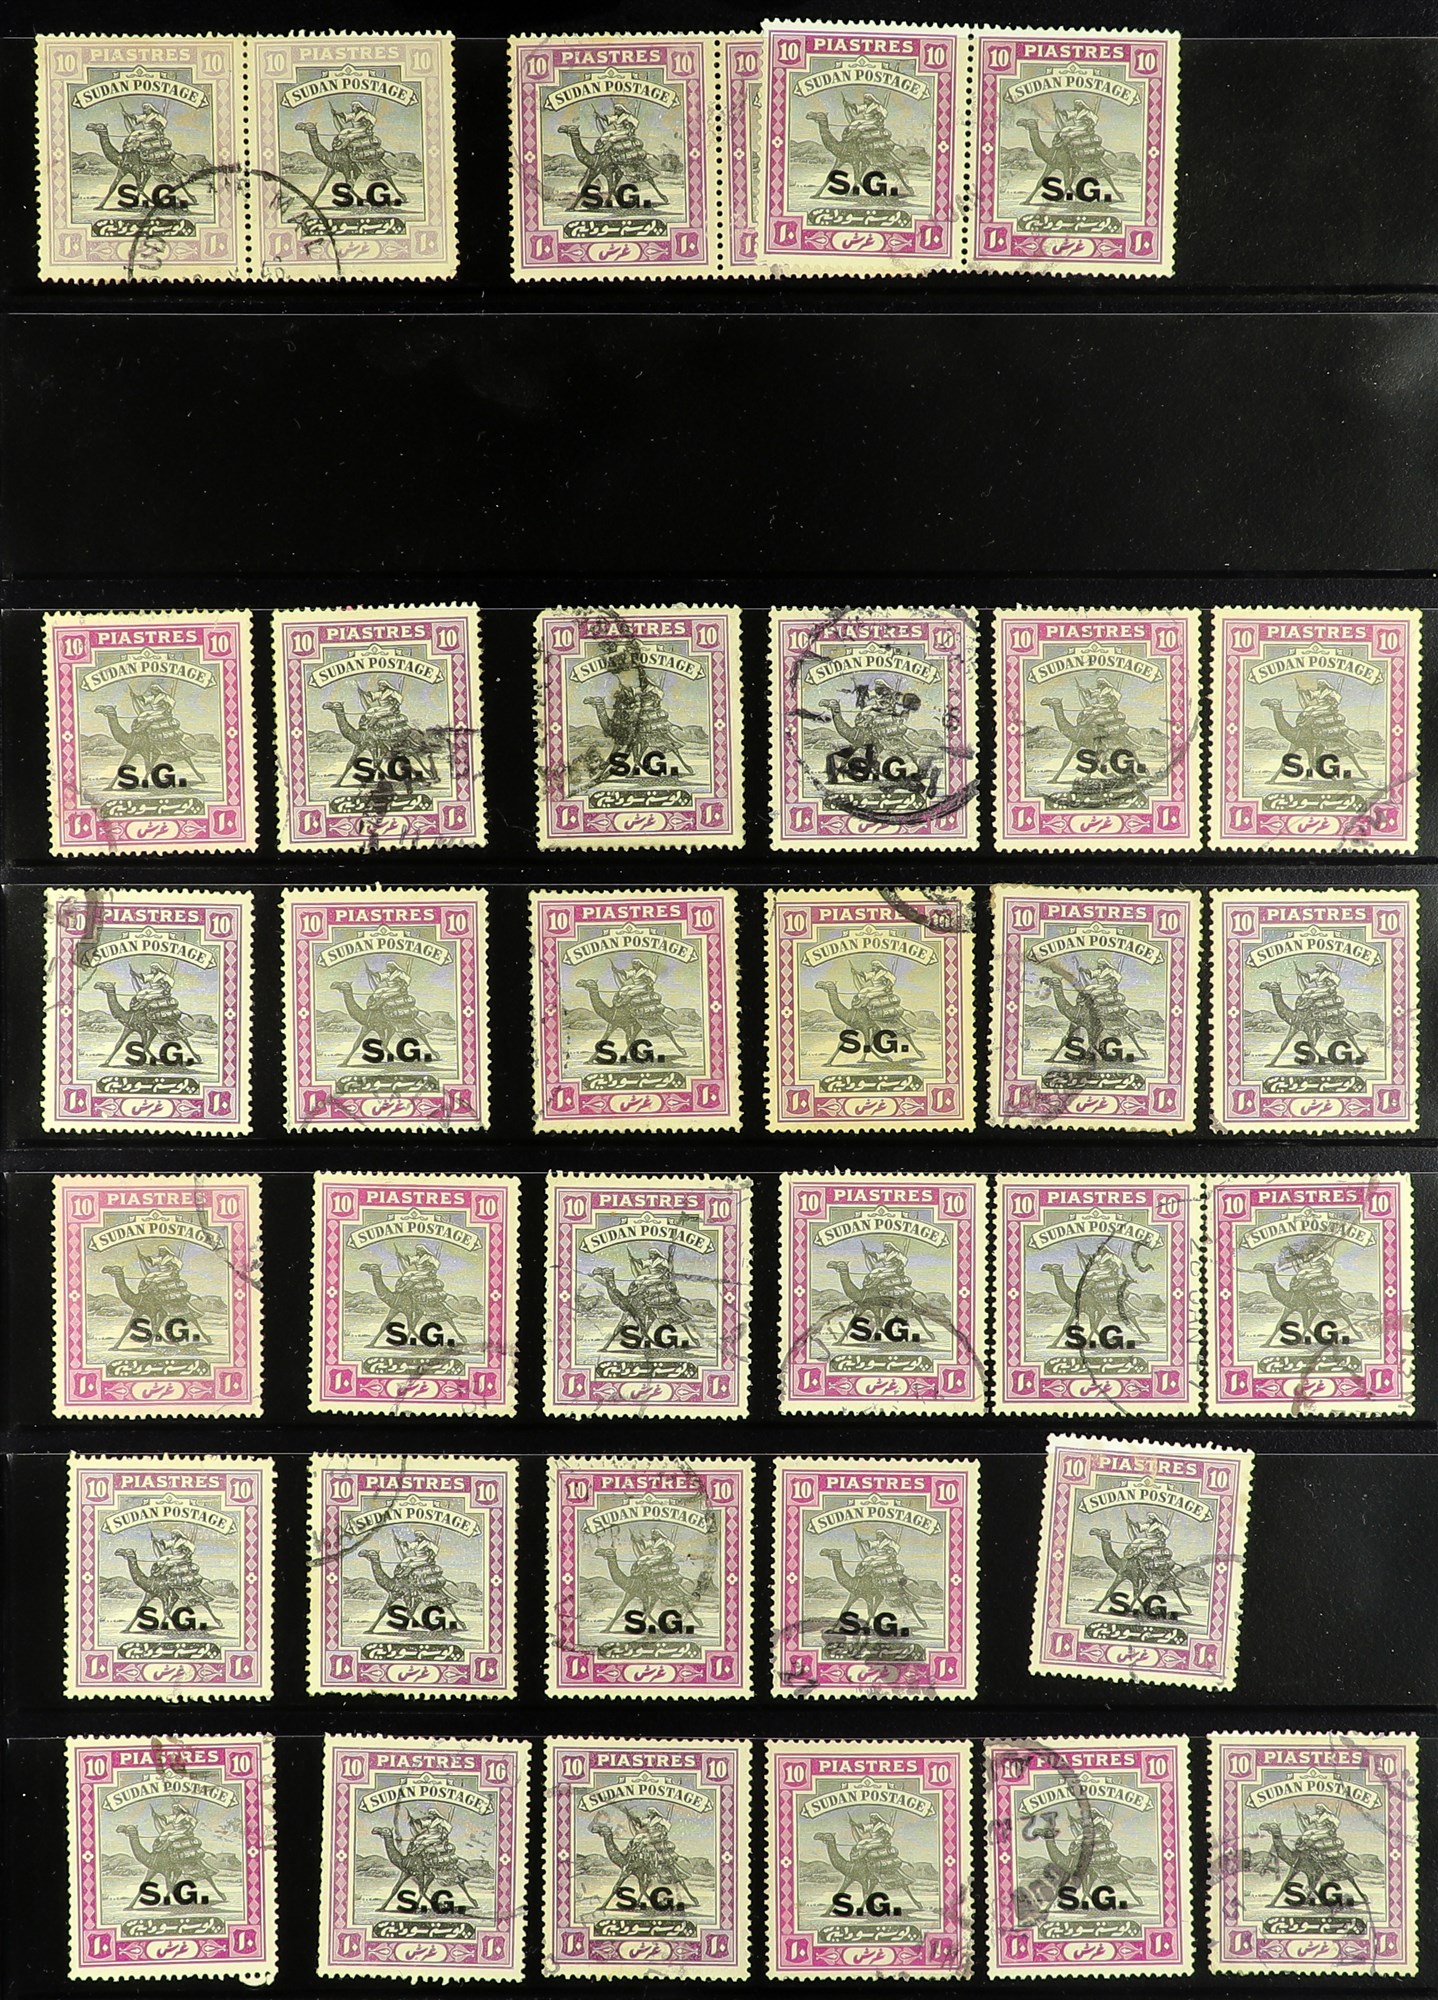 SUDAN 1898 - 1954 SPECIALISED USED RANGES IN 5 ALBUMS. Around 12,000 used stamps with many - Image 8 of 41